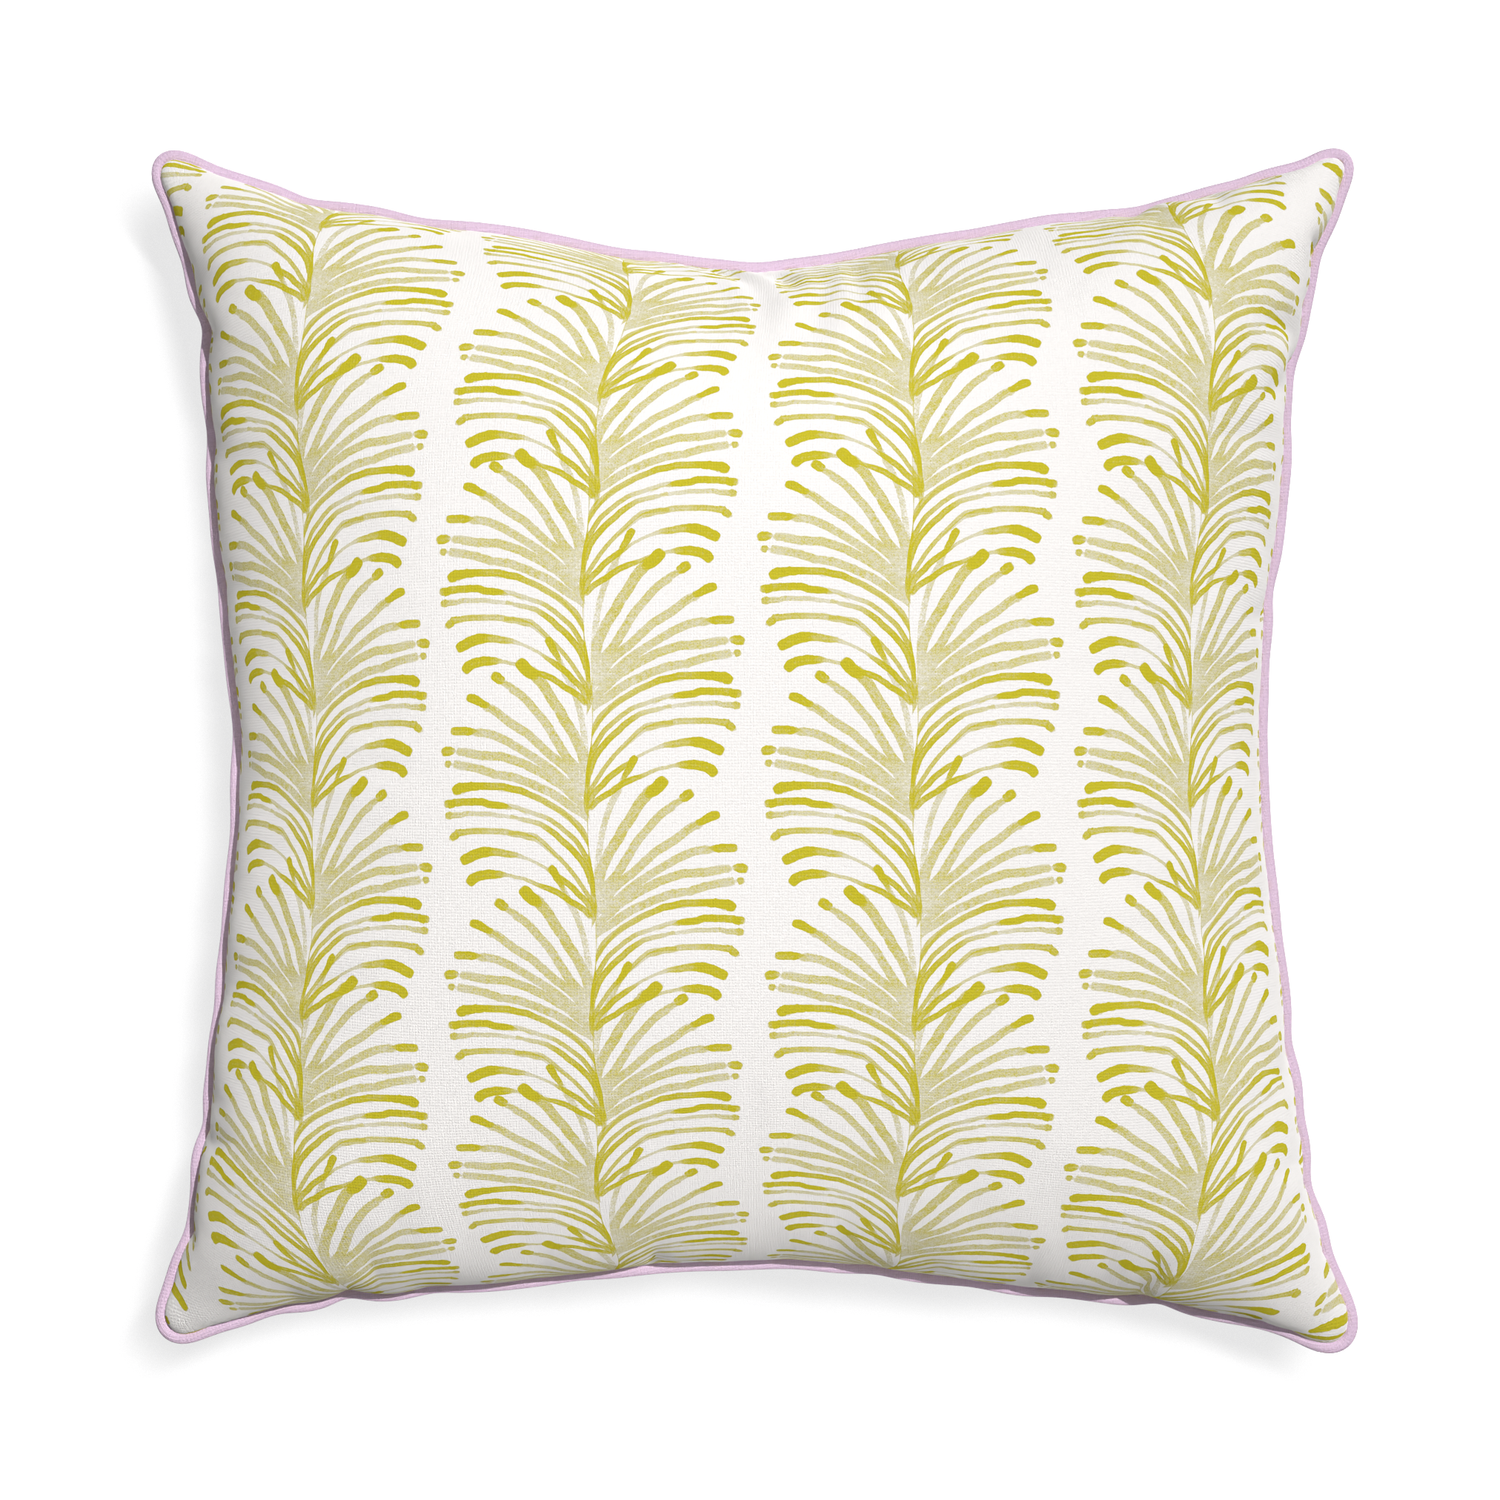 Euro-sham emma chartreuse custom yellow stripe chartreusepillow with l piping on white background